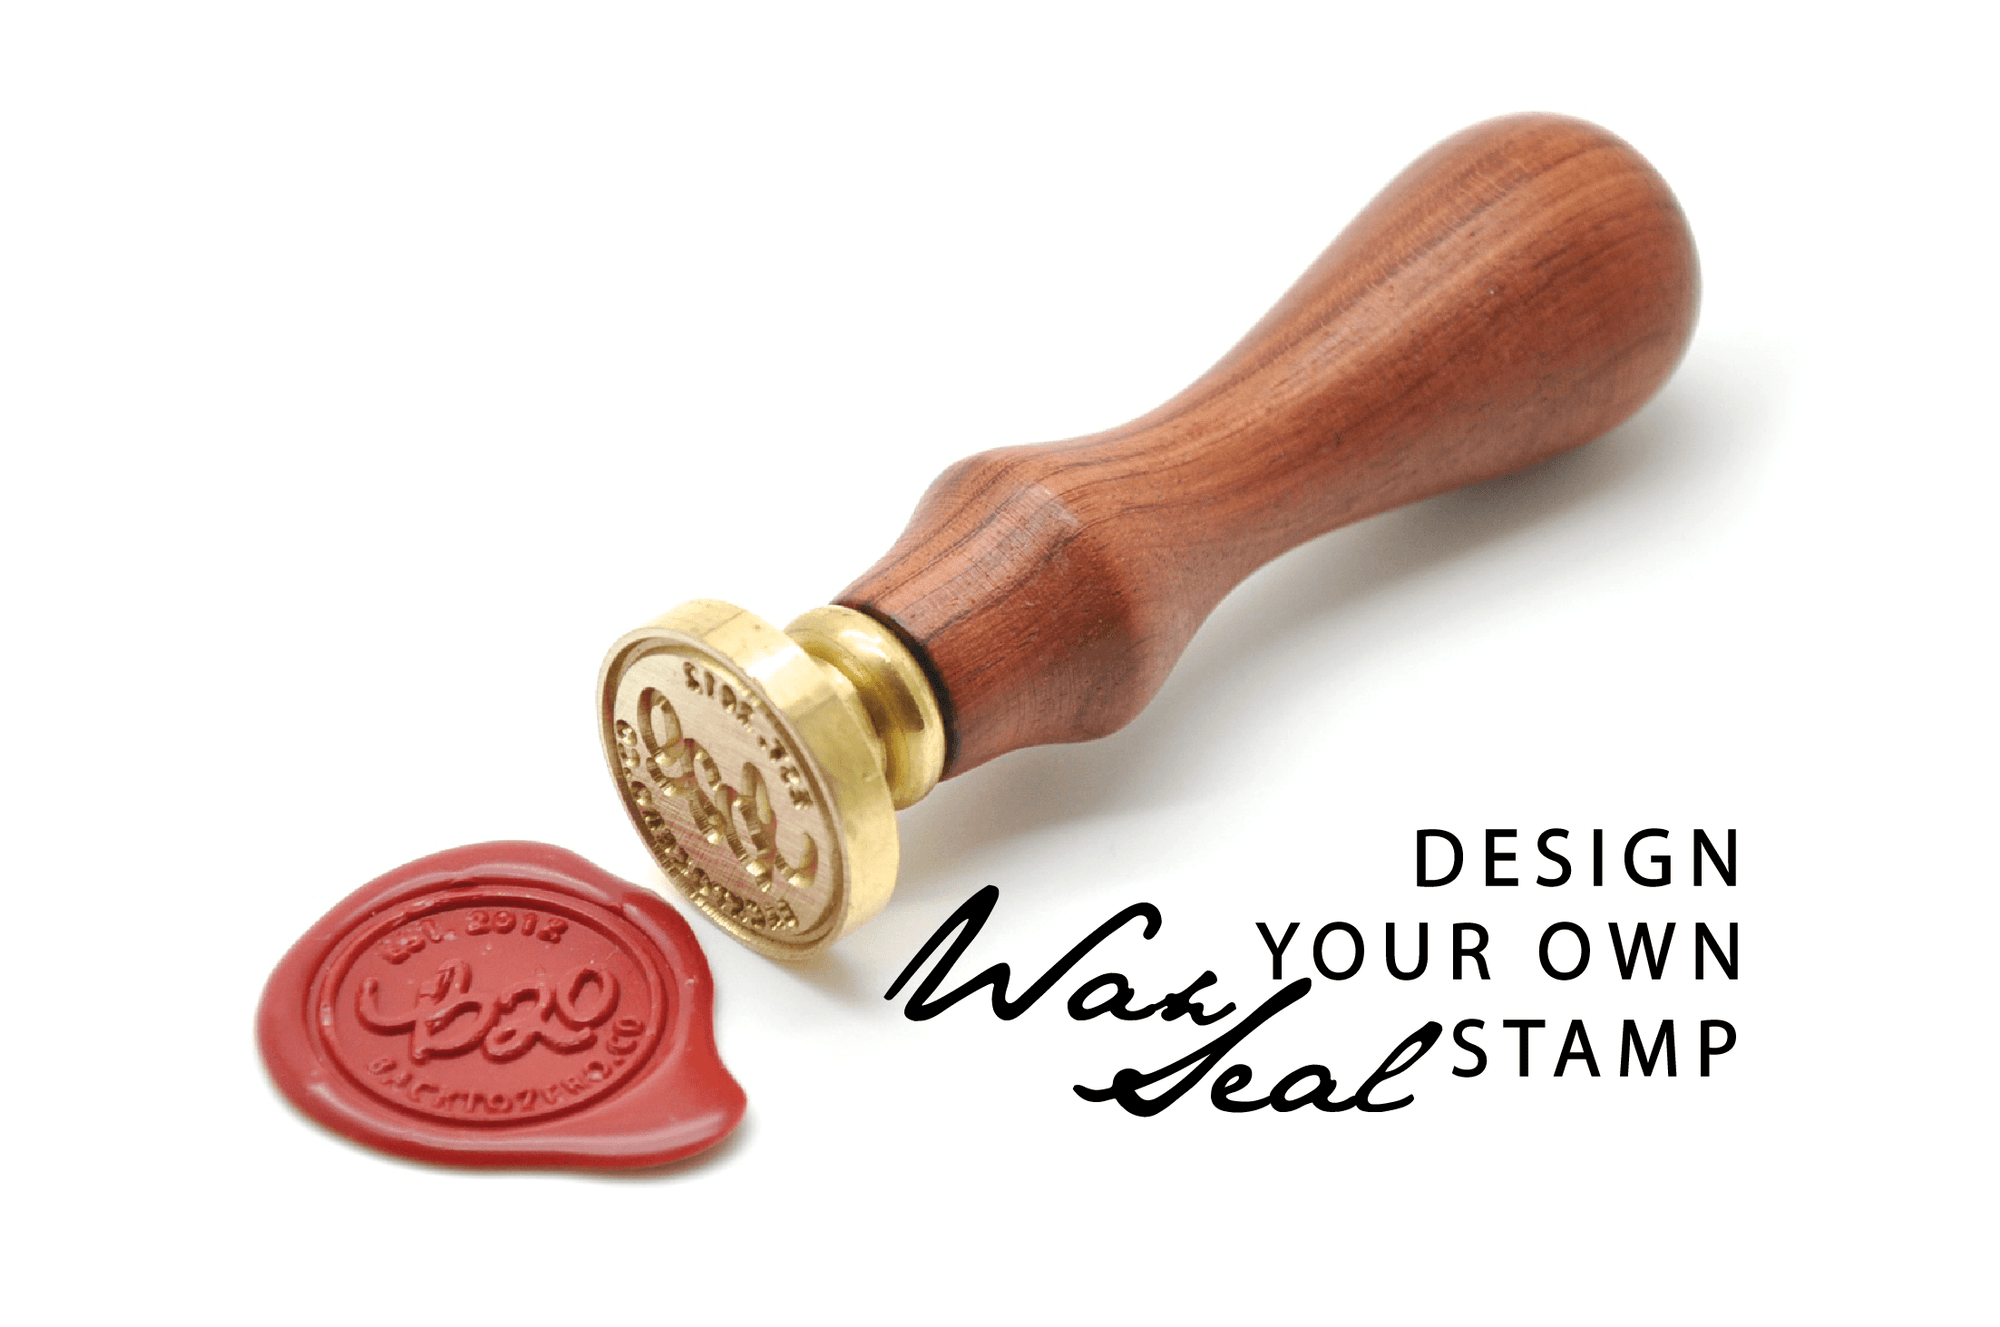 Design Your Own Wax Seal Stamp